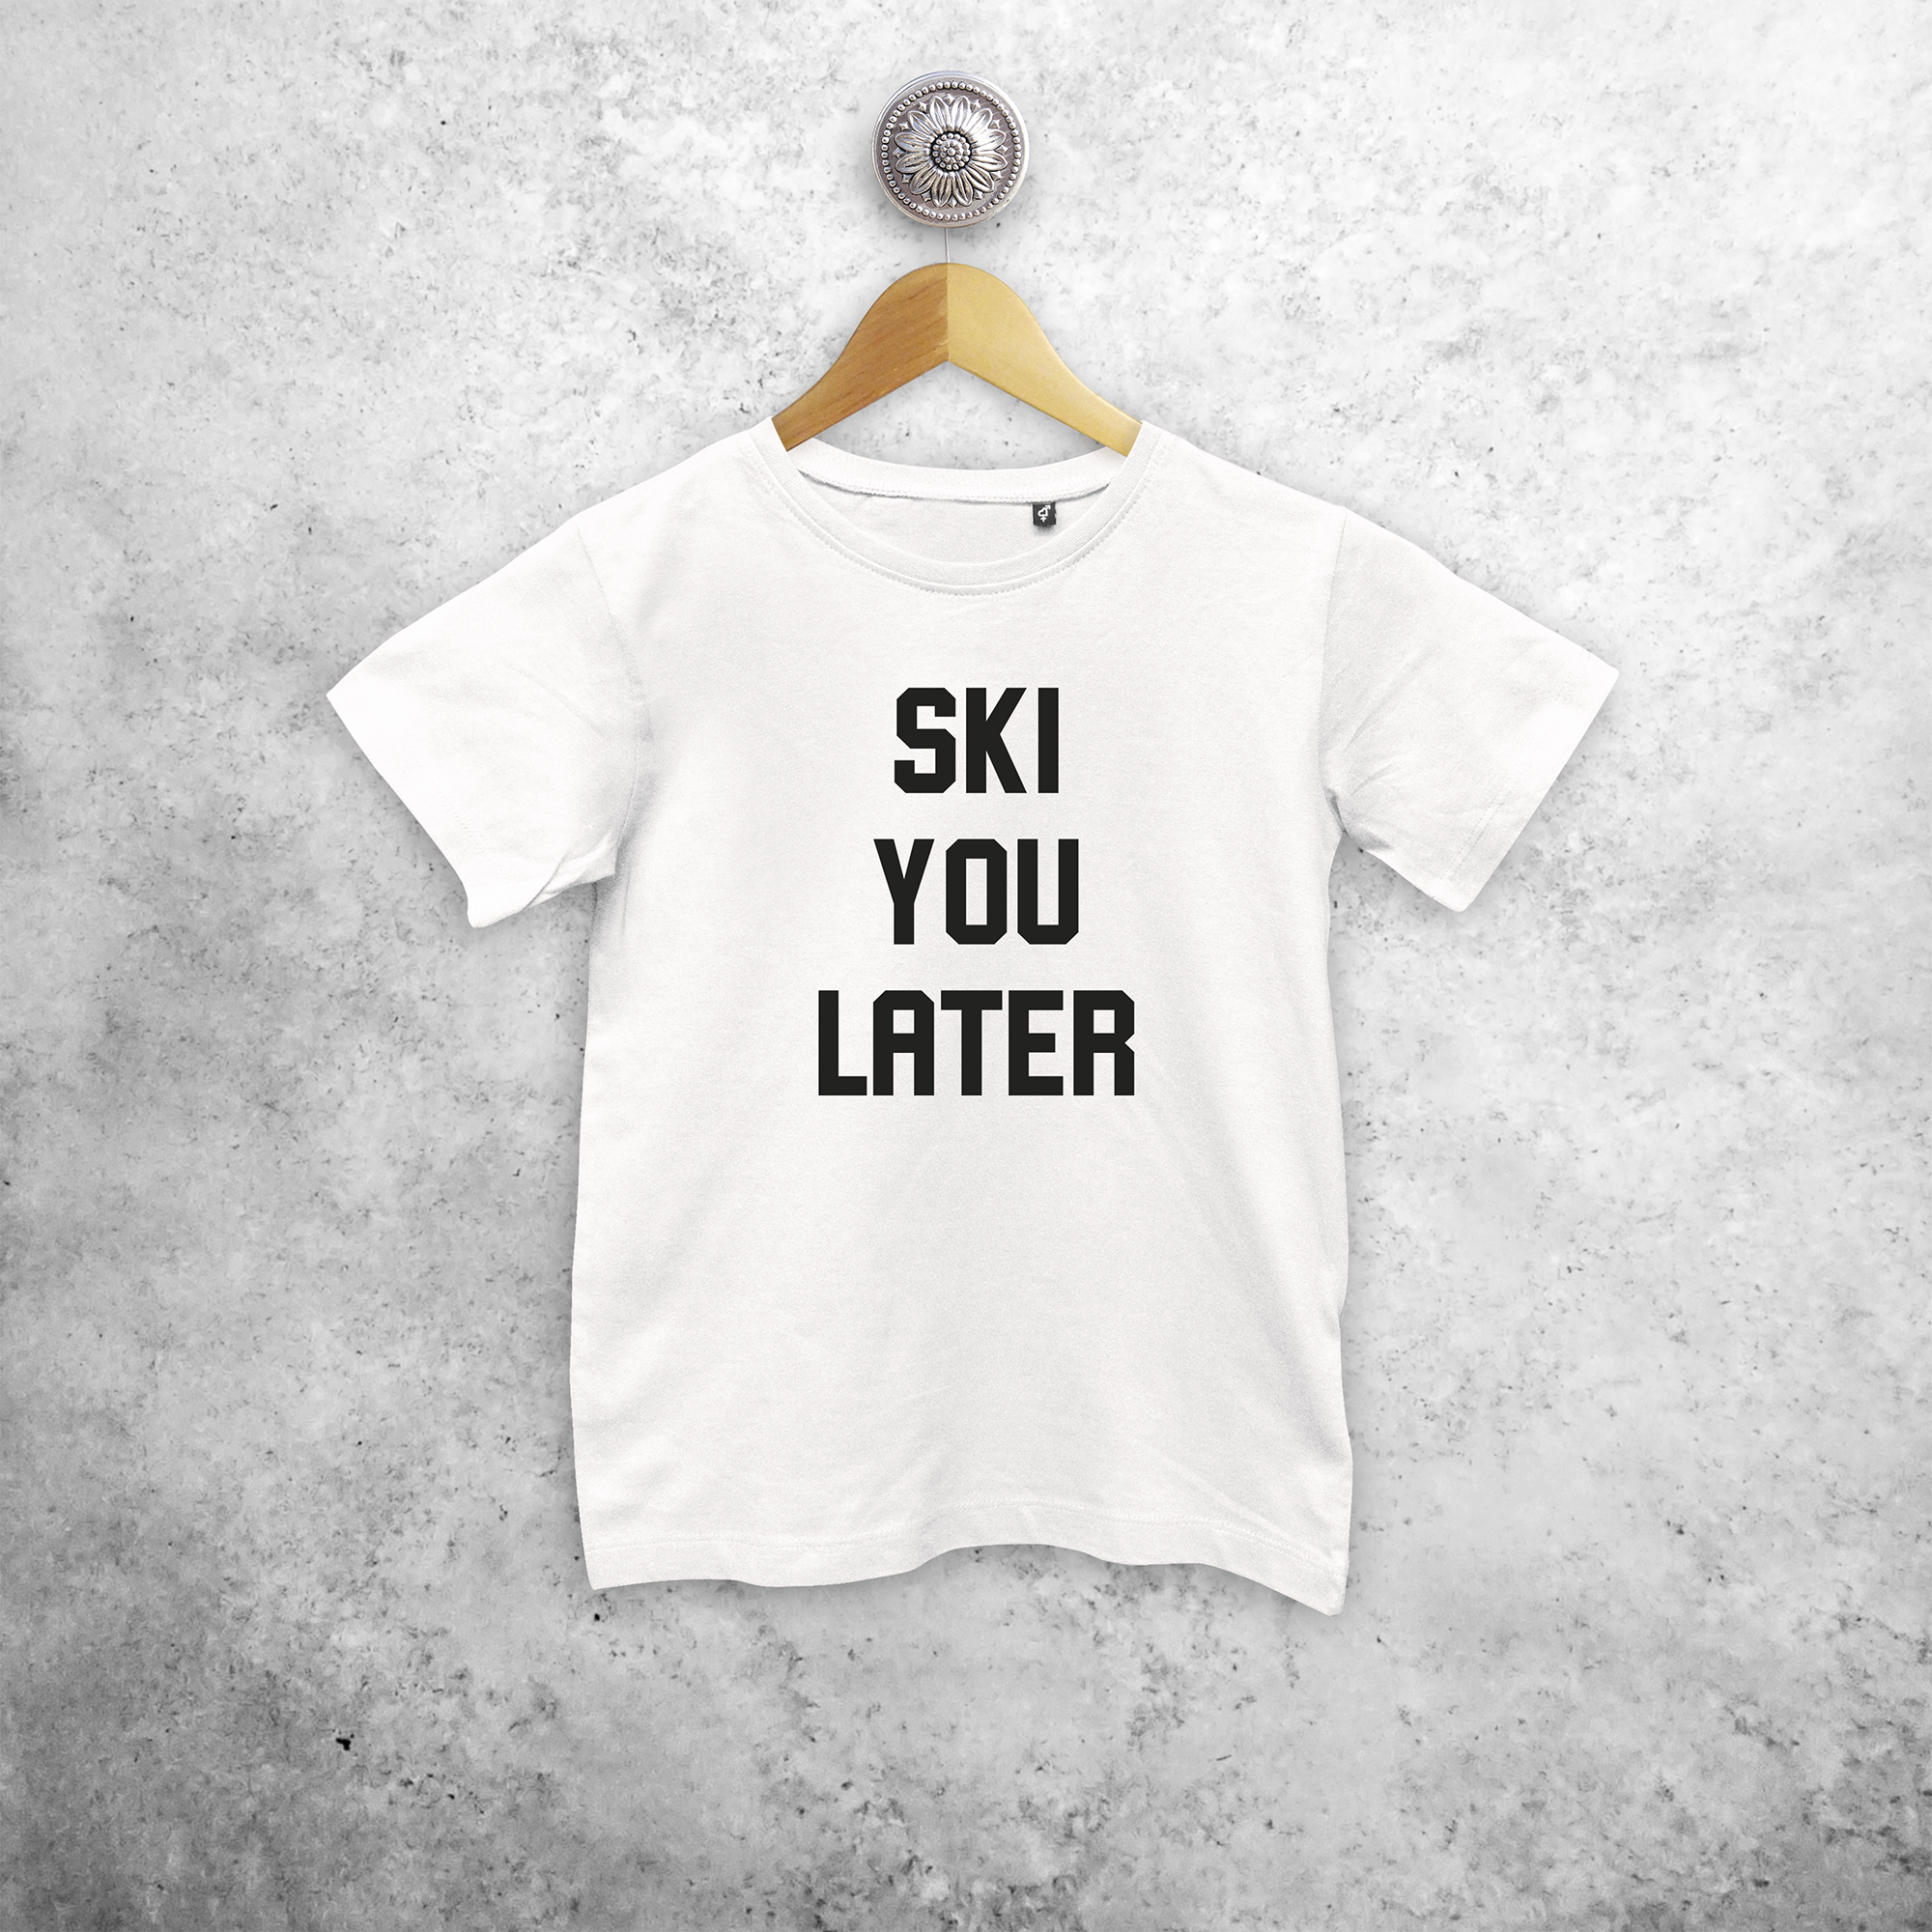 Kids shirt with short sleeves, with 'Ski you later' print by KMLeon.